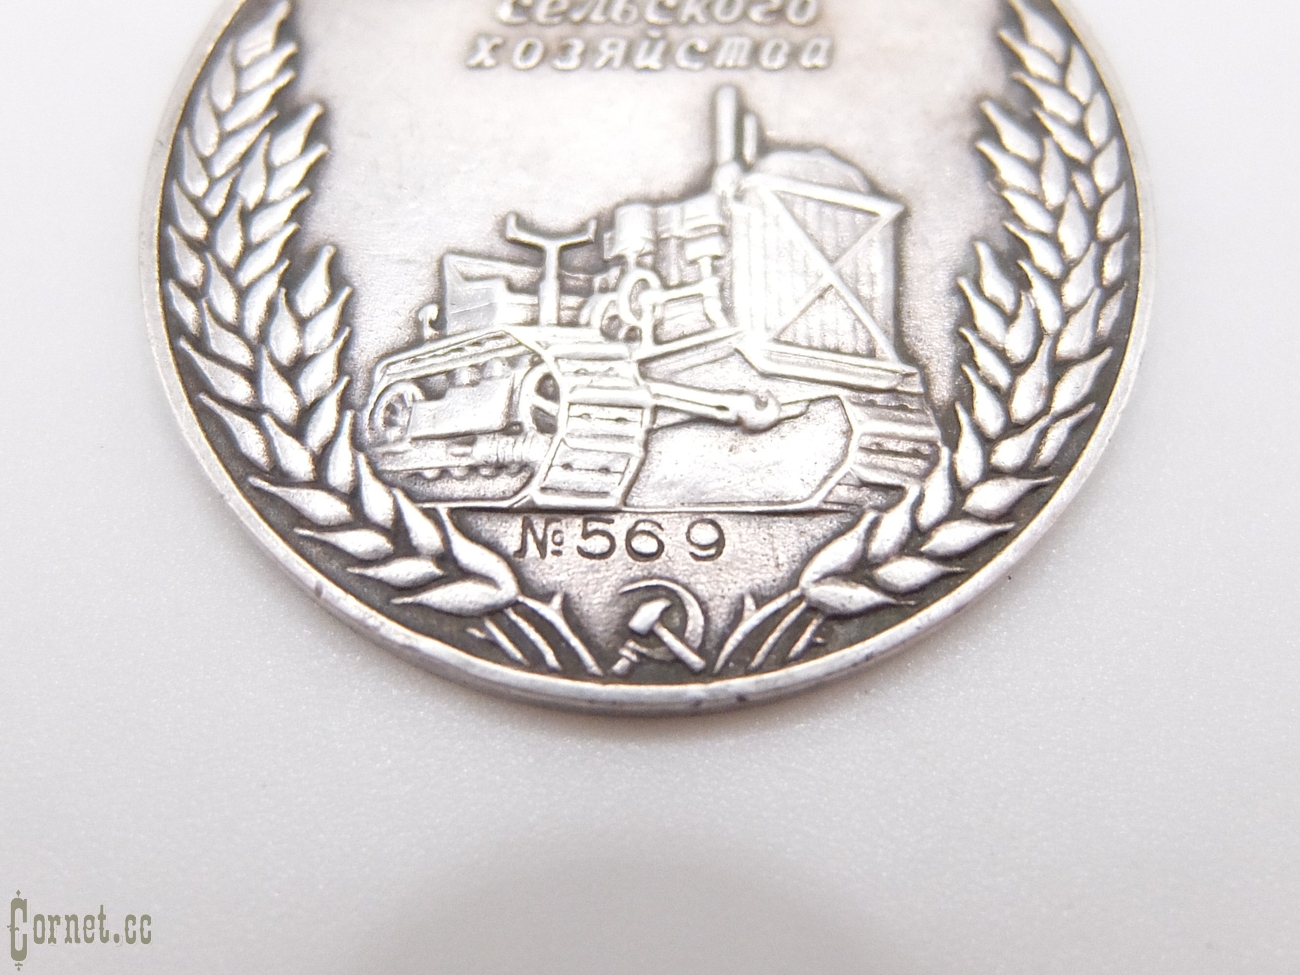 Medal of the All-Union Agricultural Exhibition of 1940